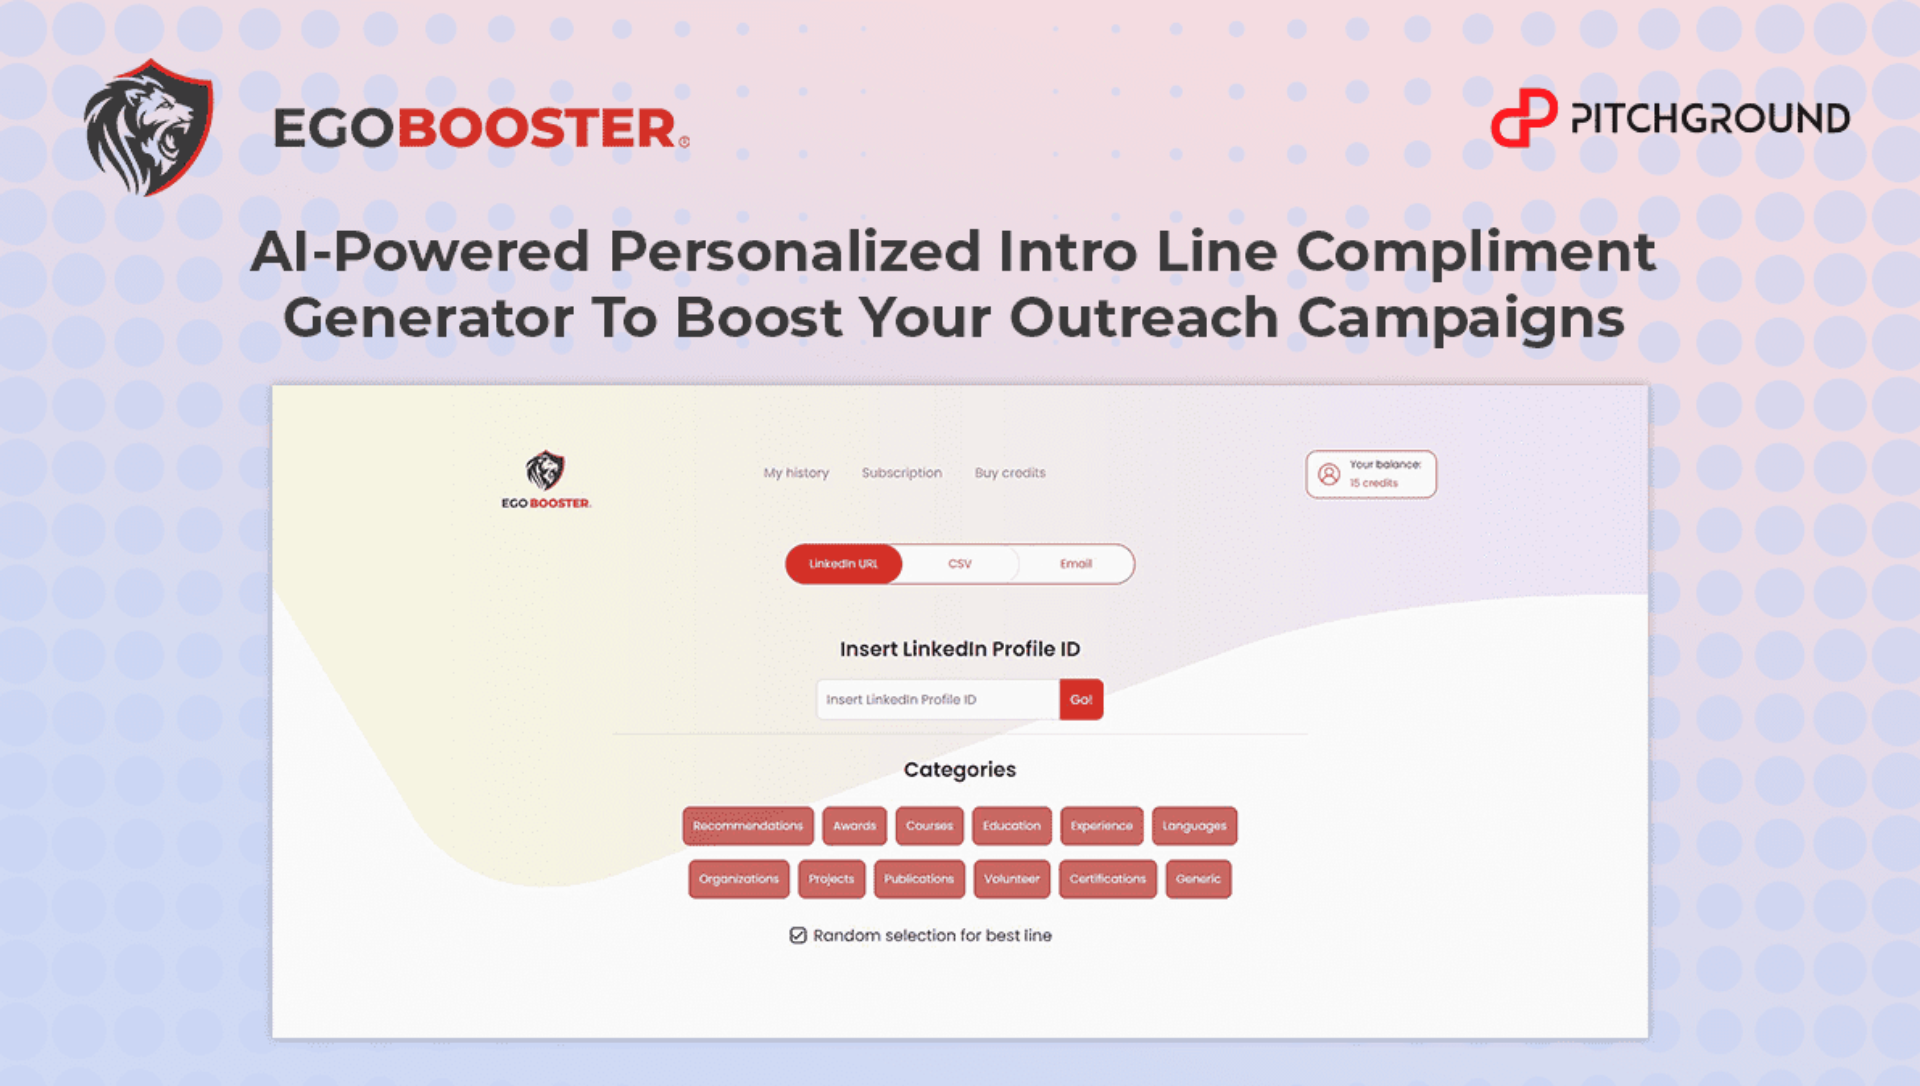 Lifetime Deal to EgoBooster: Plan A (Pro) for $49